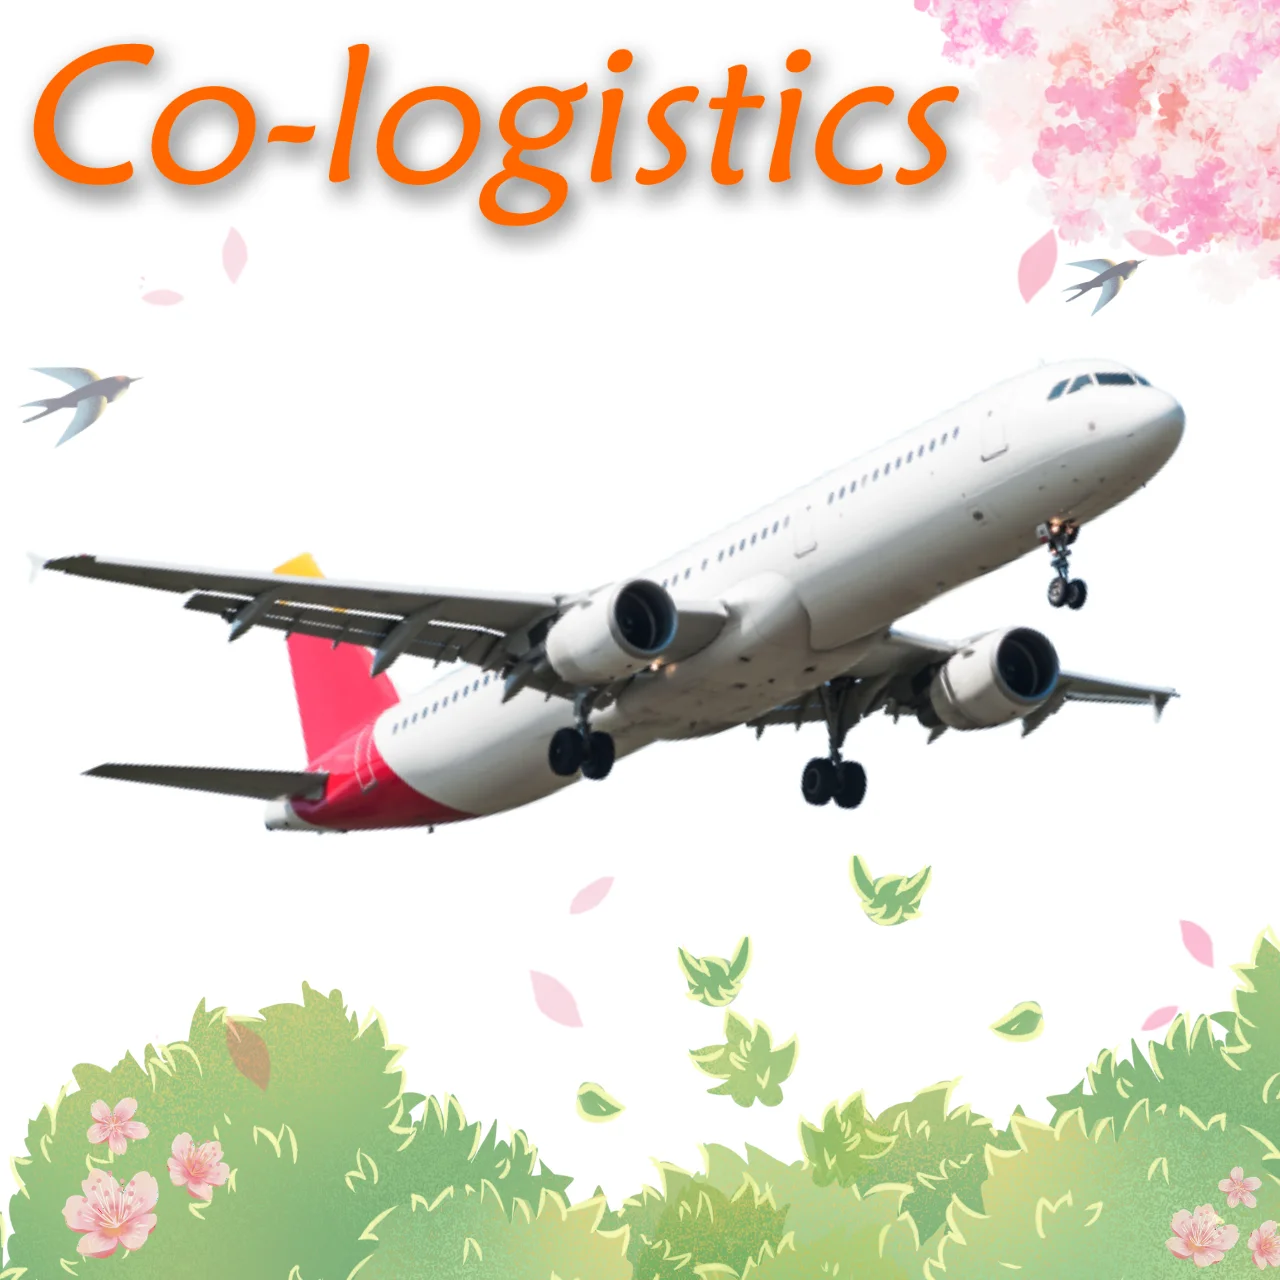 China Shipping Agent to USA/Canada Air Freight service from SHENZHEN/SHANGHAI  DDP AIR Cargo Amazon  service